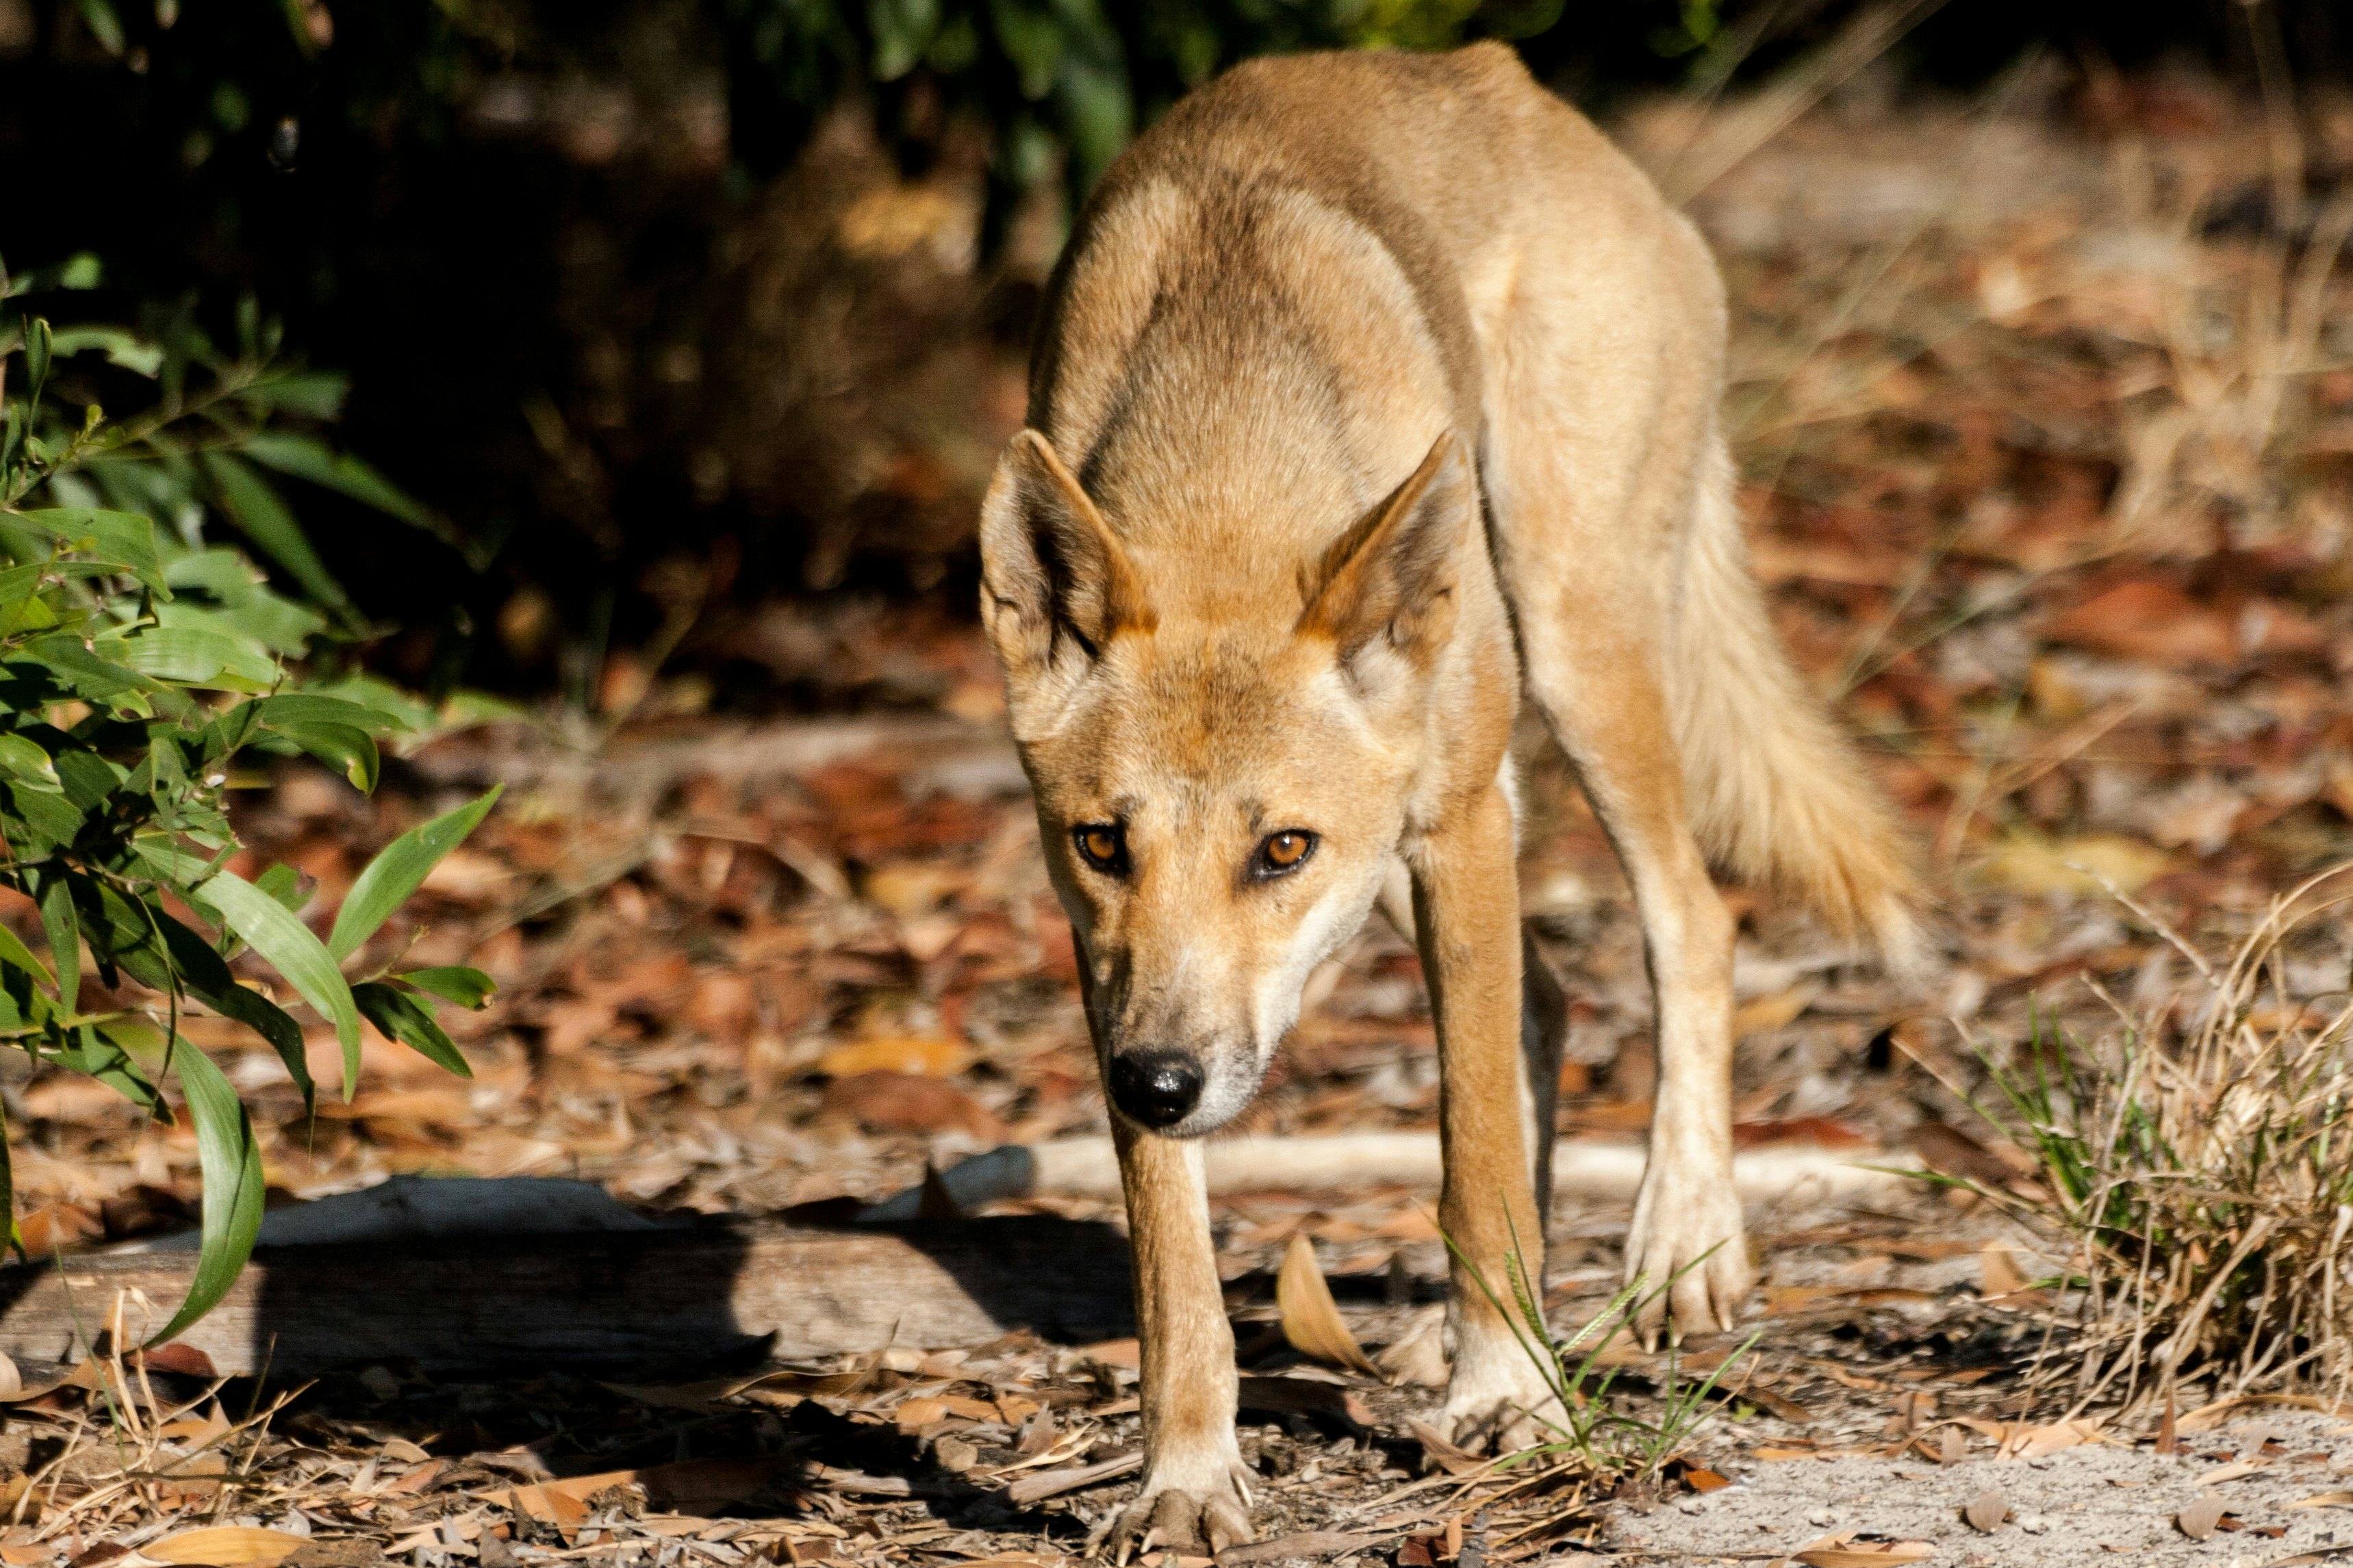 Are dingoes dogs or wolves? Surprise, they're neither